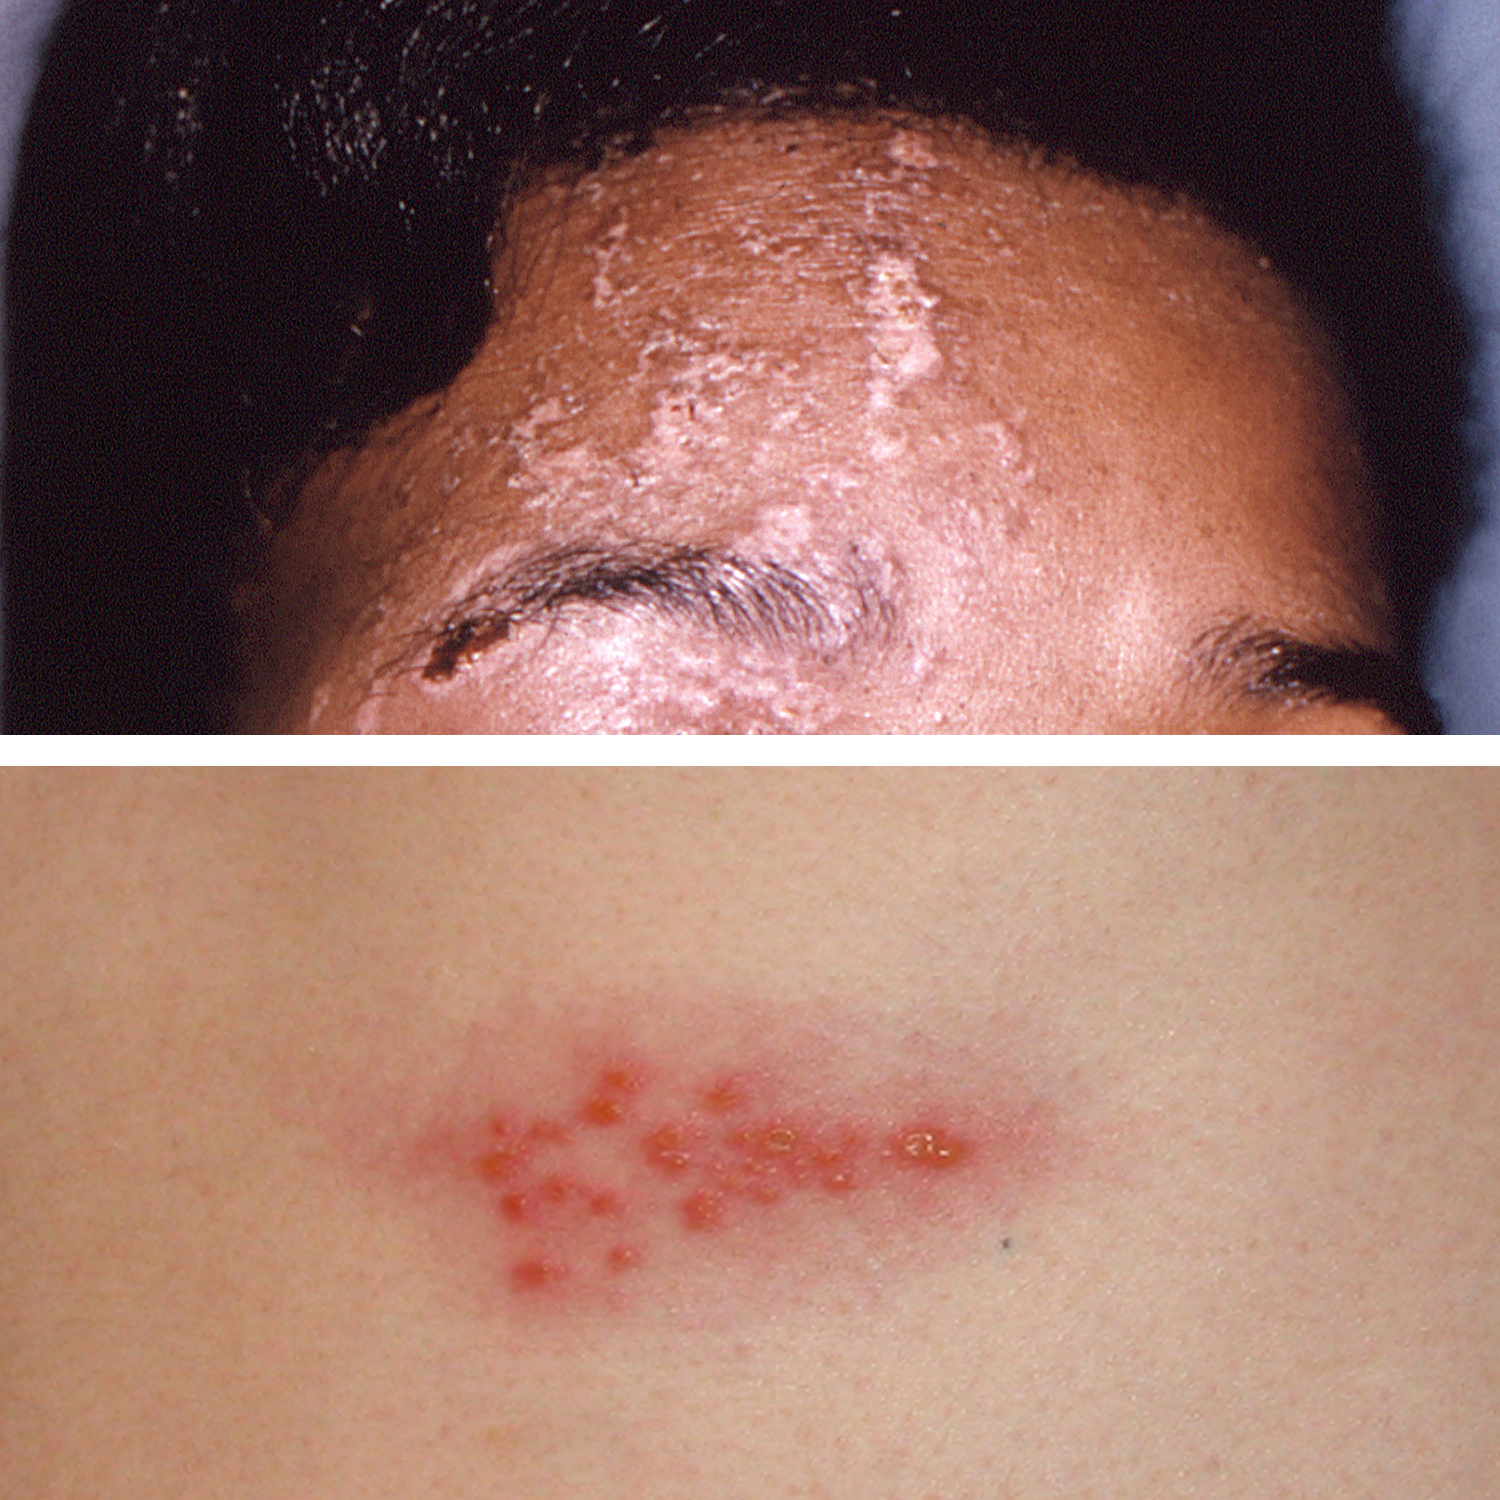 Adolescent female with rash on the arms and posterior legs